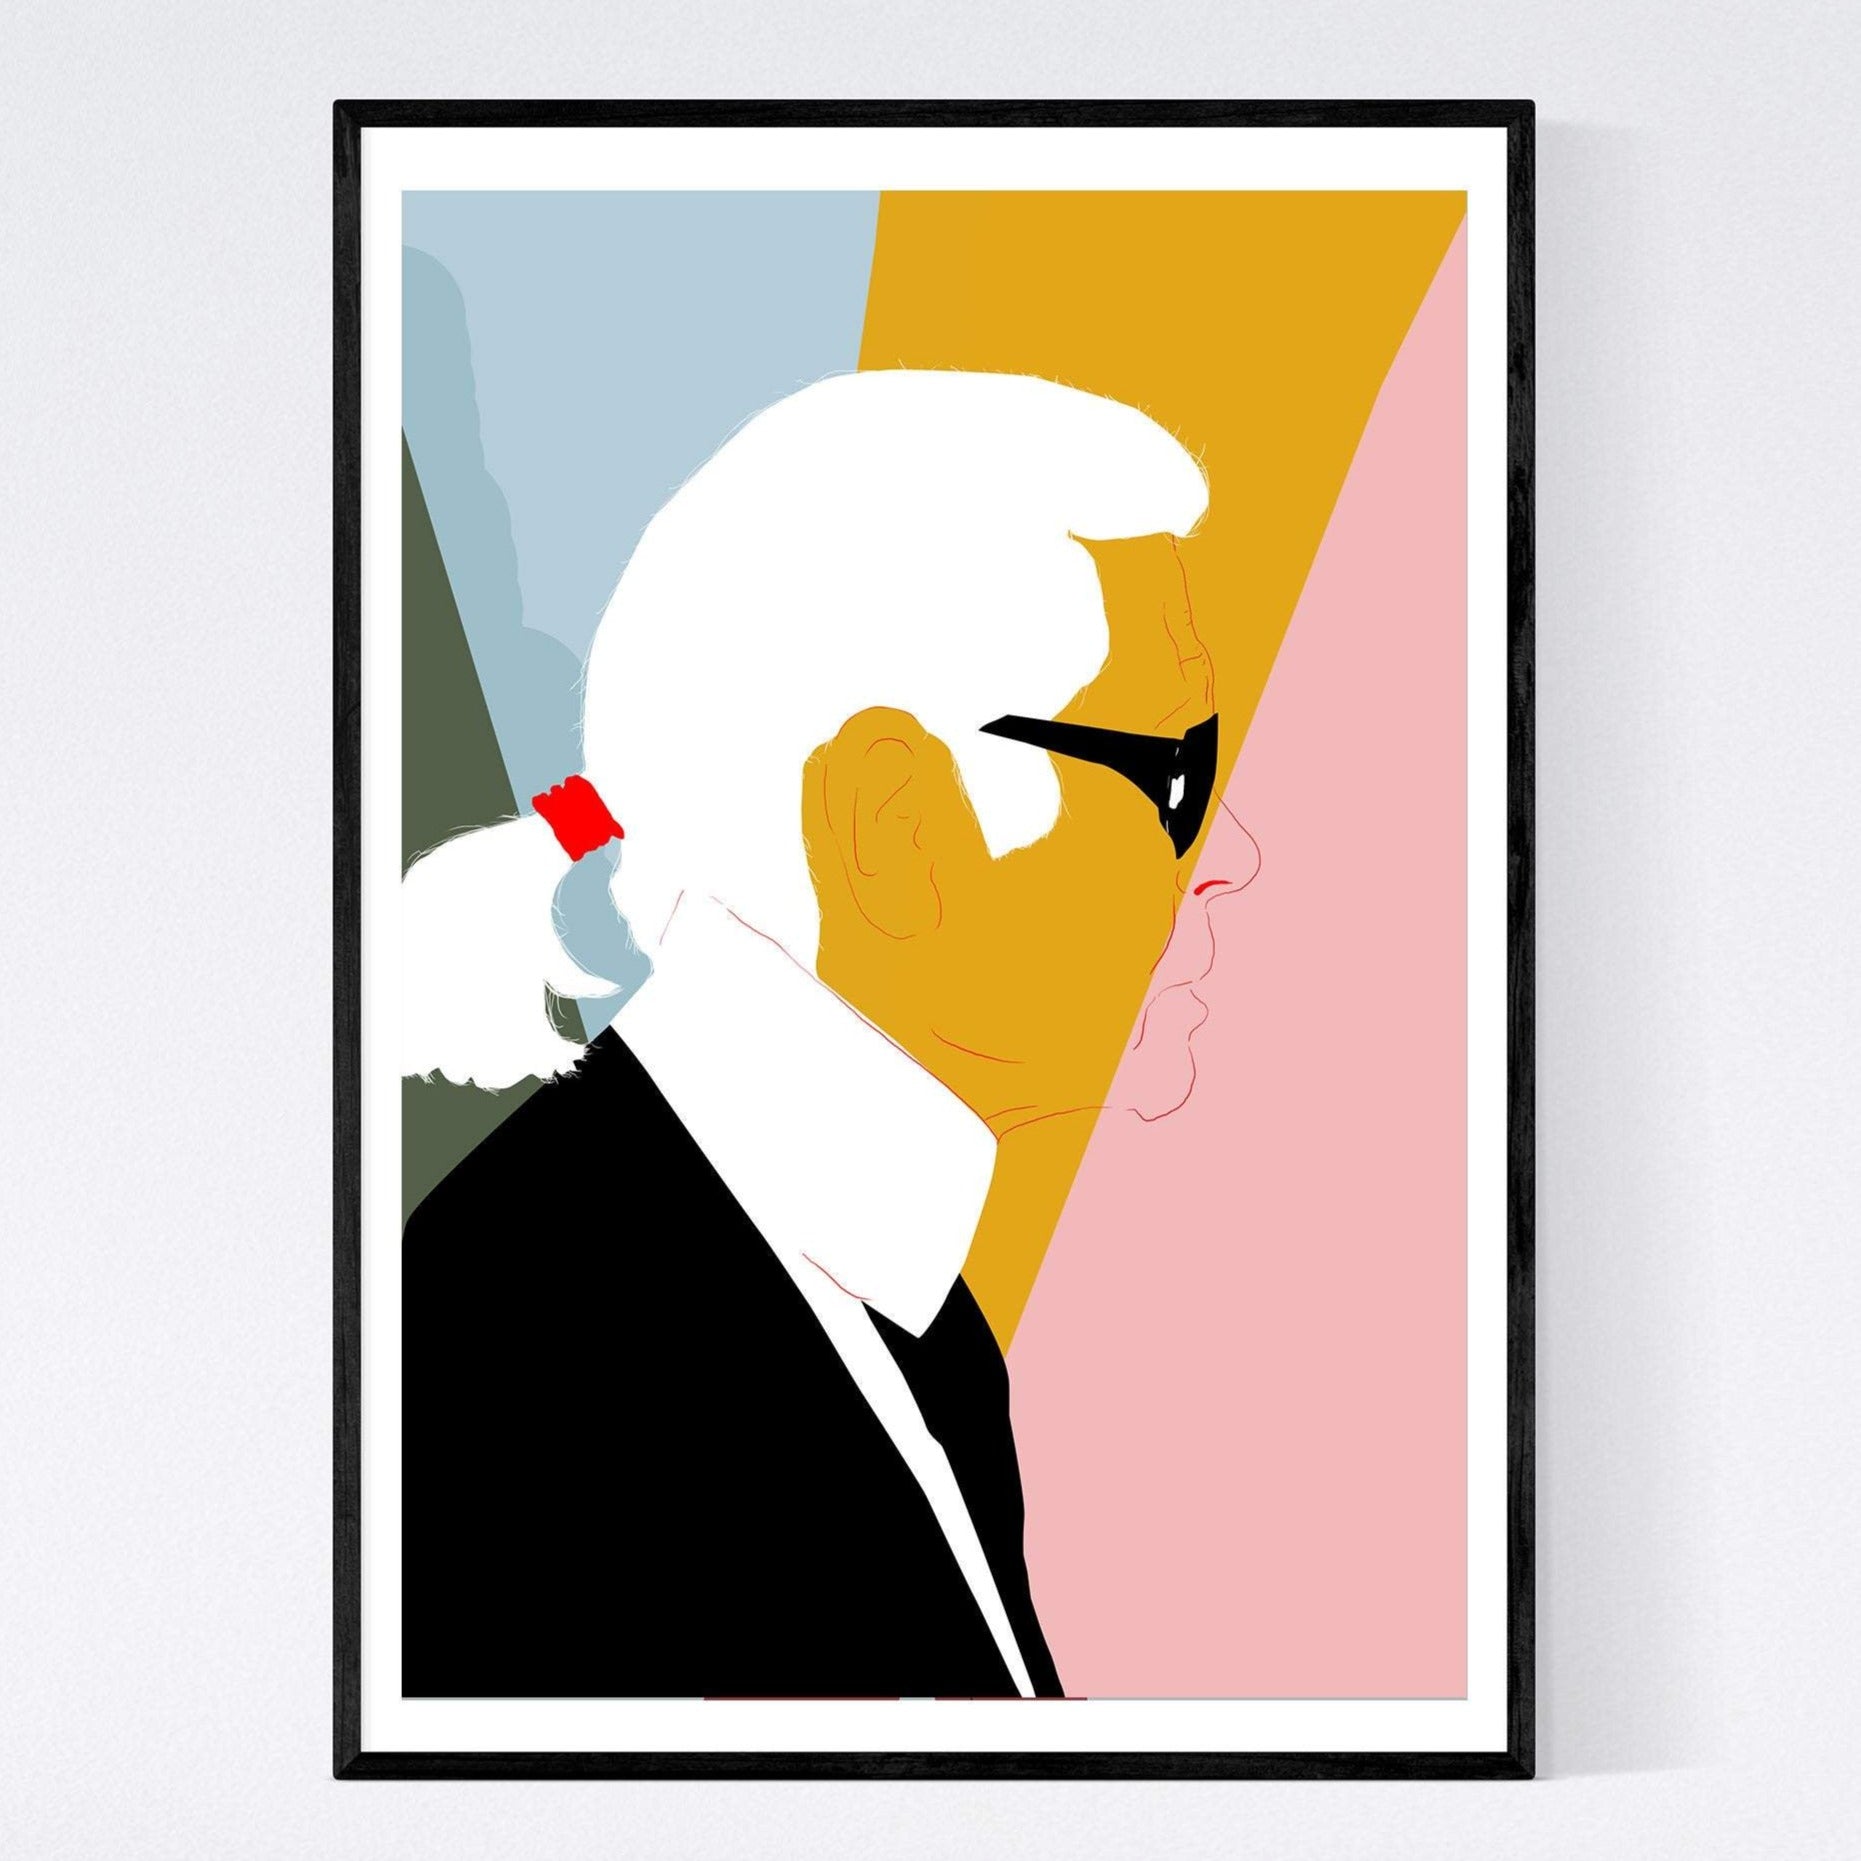 illustration print of karl lagerfeld in profile with swatches of blue, pink, yellow and green behind him. the print is in a minimal frame on a white wall.